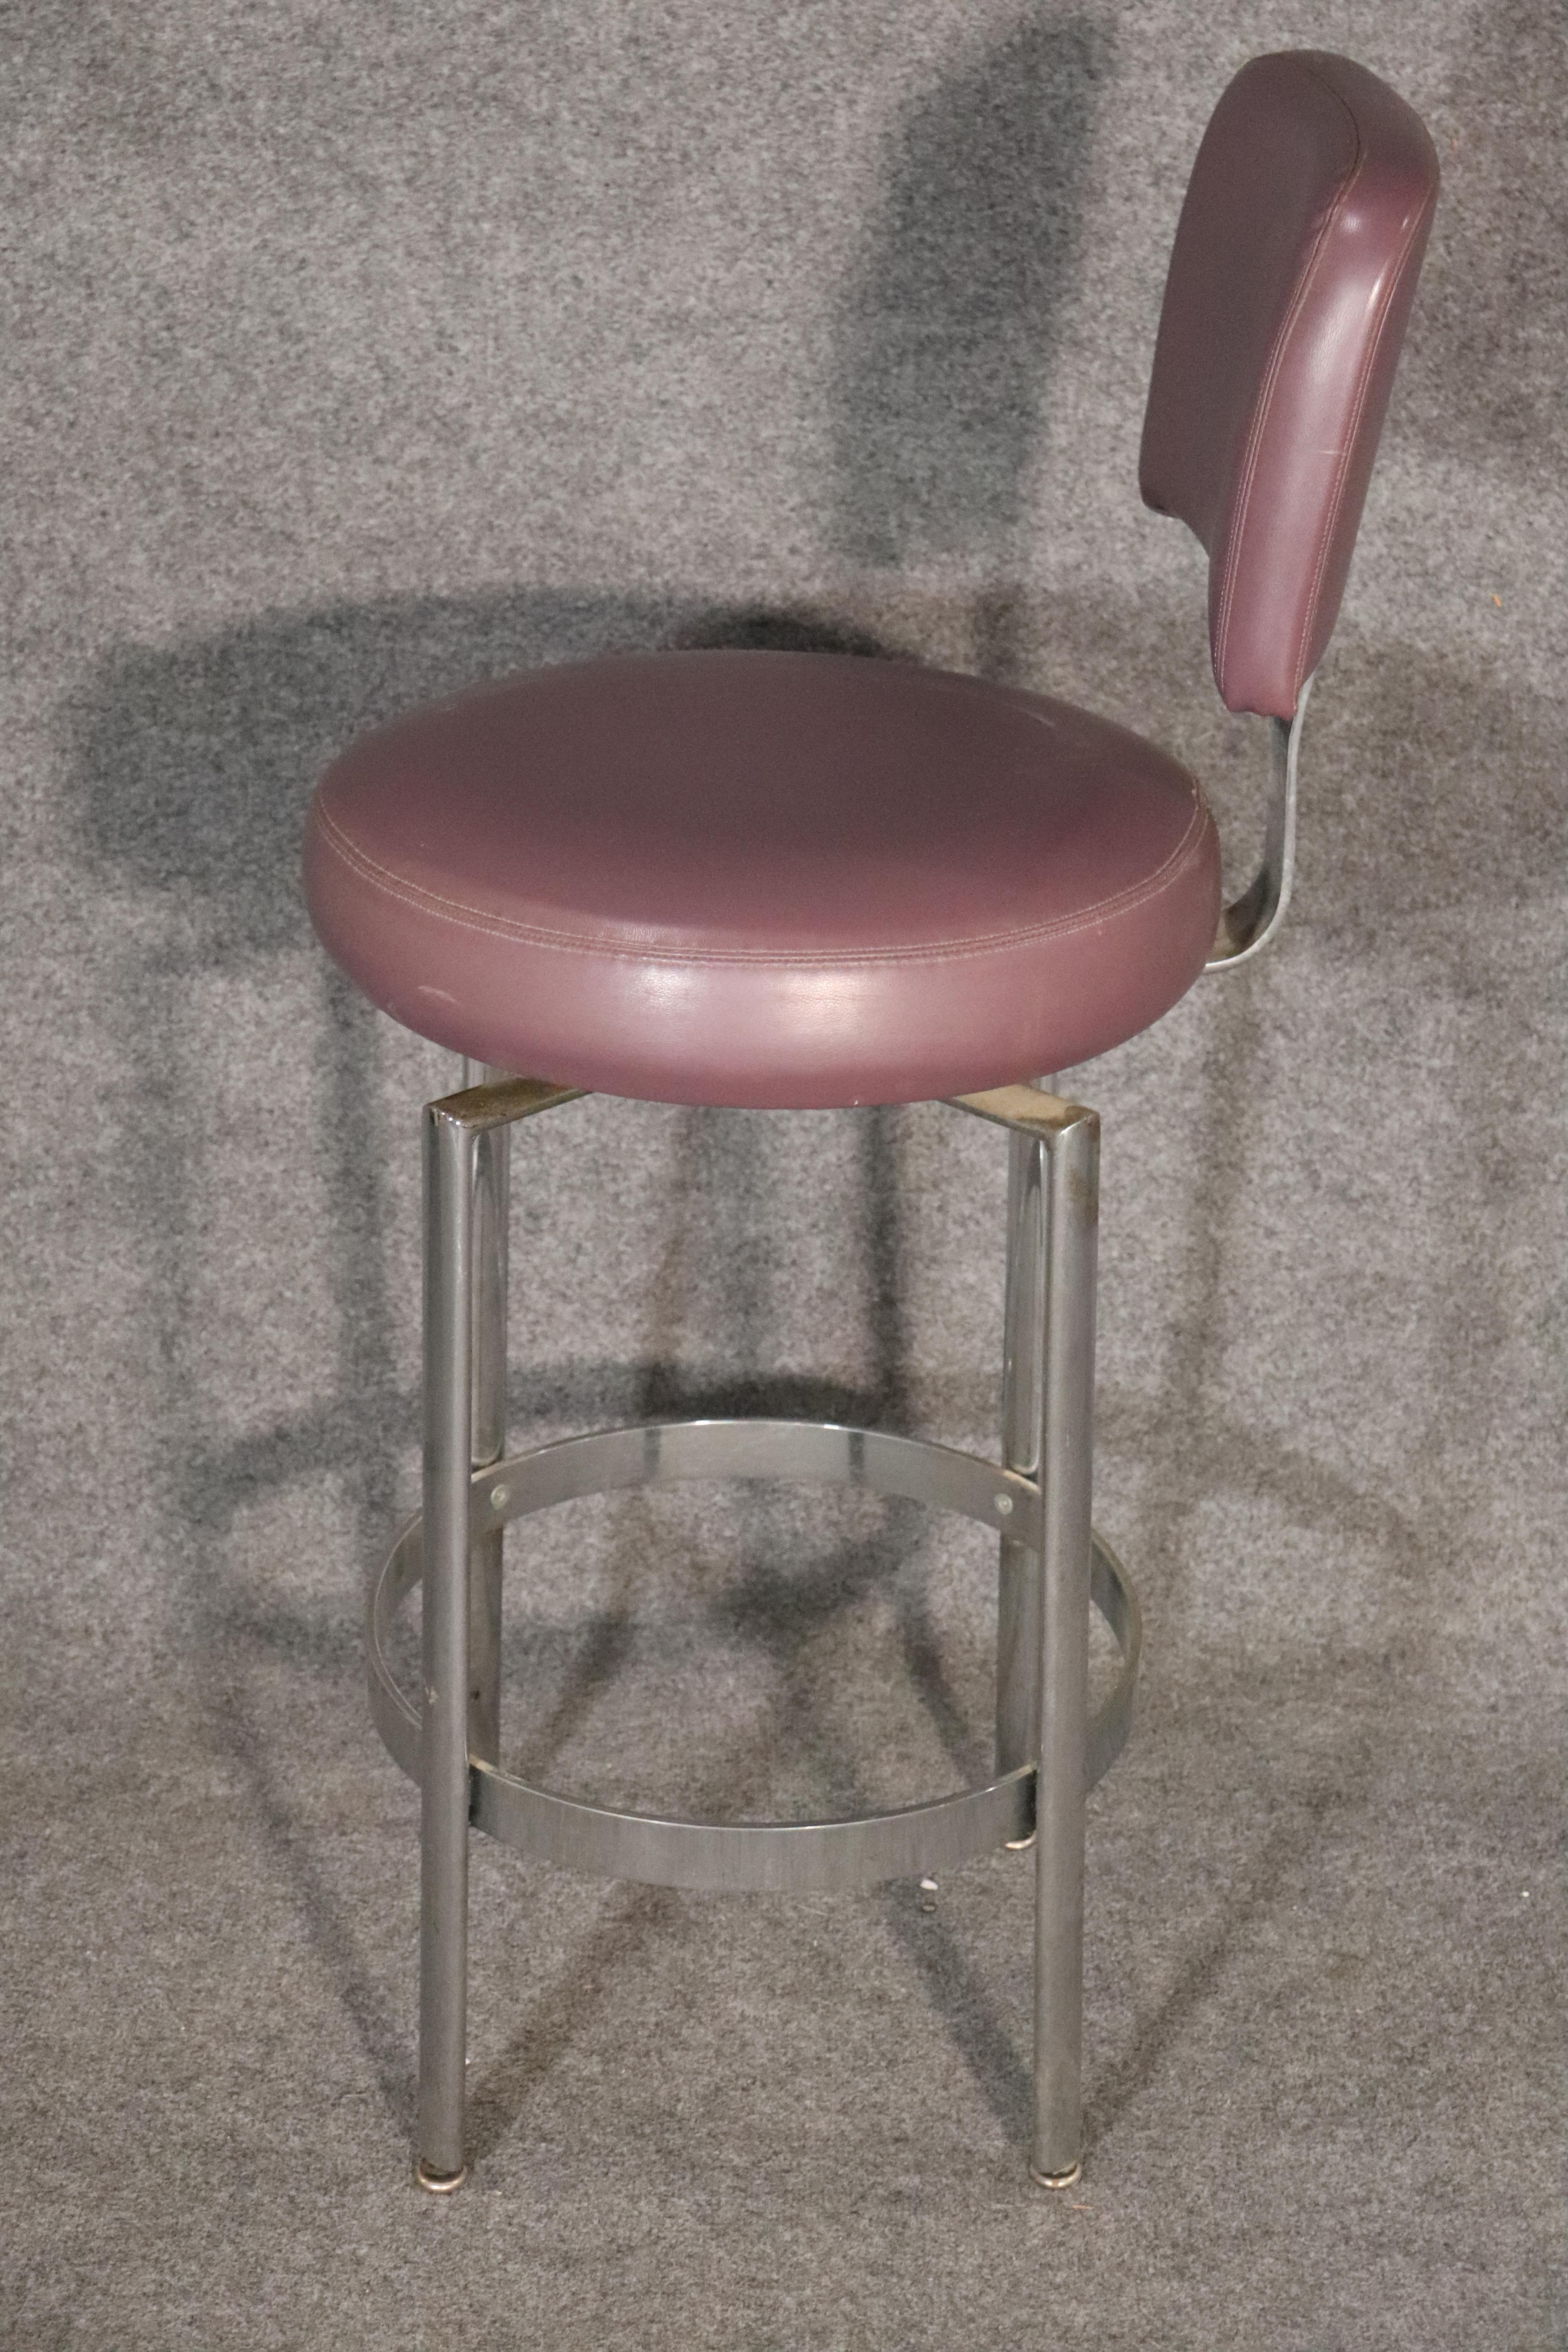 Four modern stools with polished chrome bases and purple faux leather seats and backs.
Please confirm location NY or NJ.